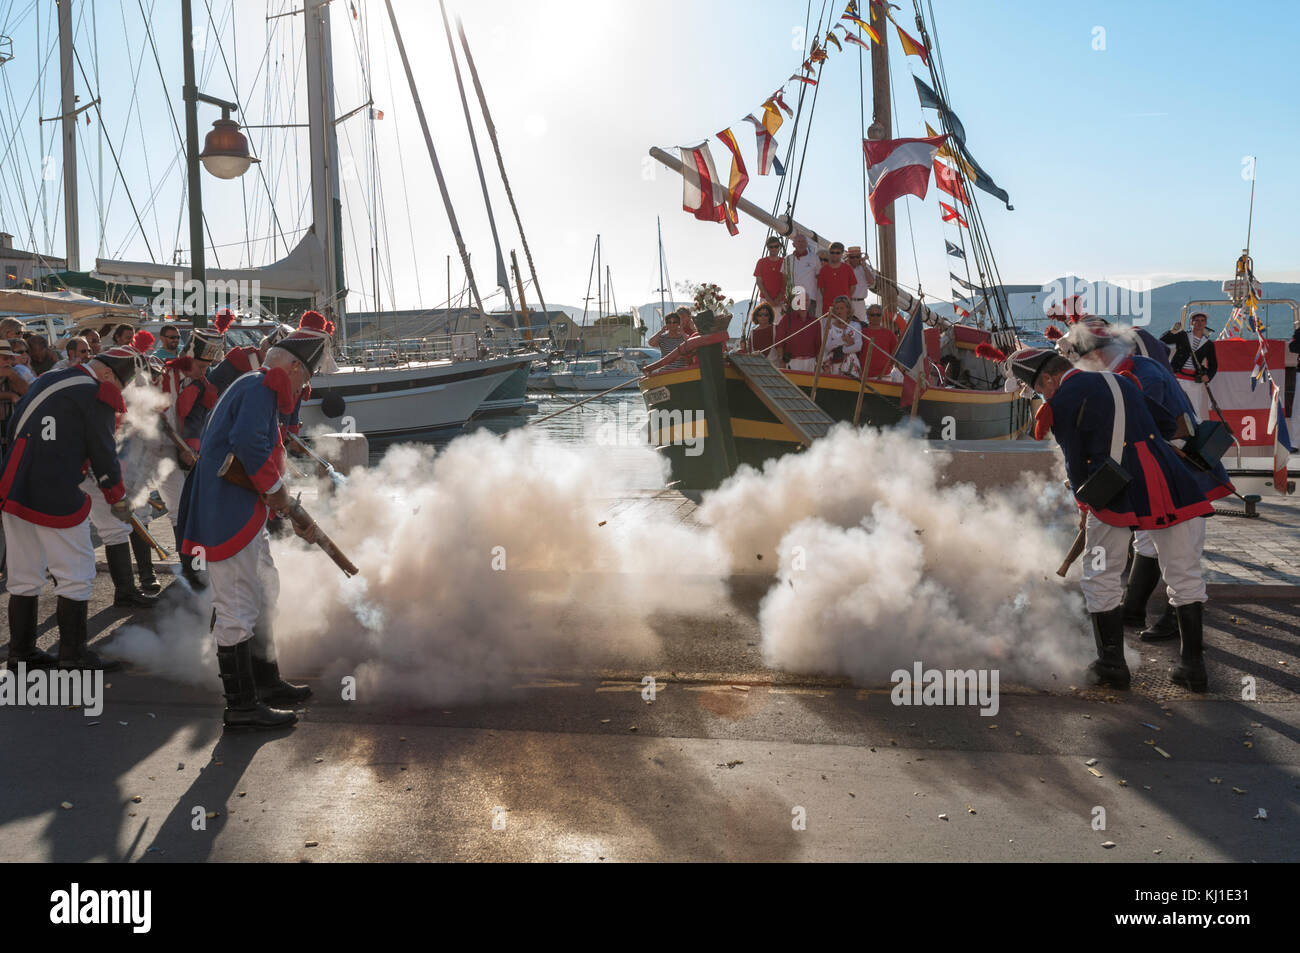 Europe, France, Var, 83, St Tropez, the bravado, fired blunderbusses in a port. Stock Photo